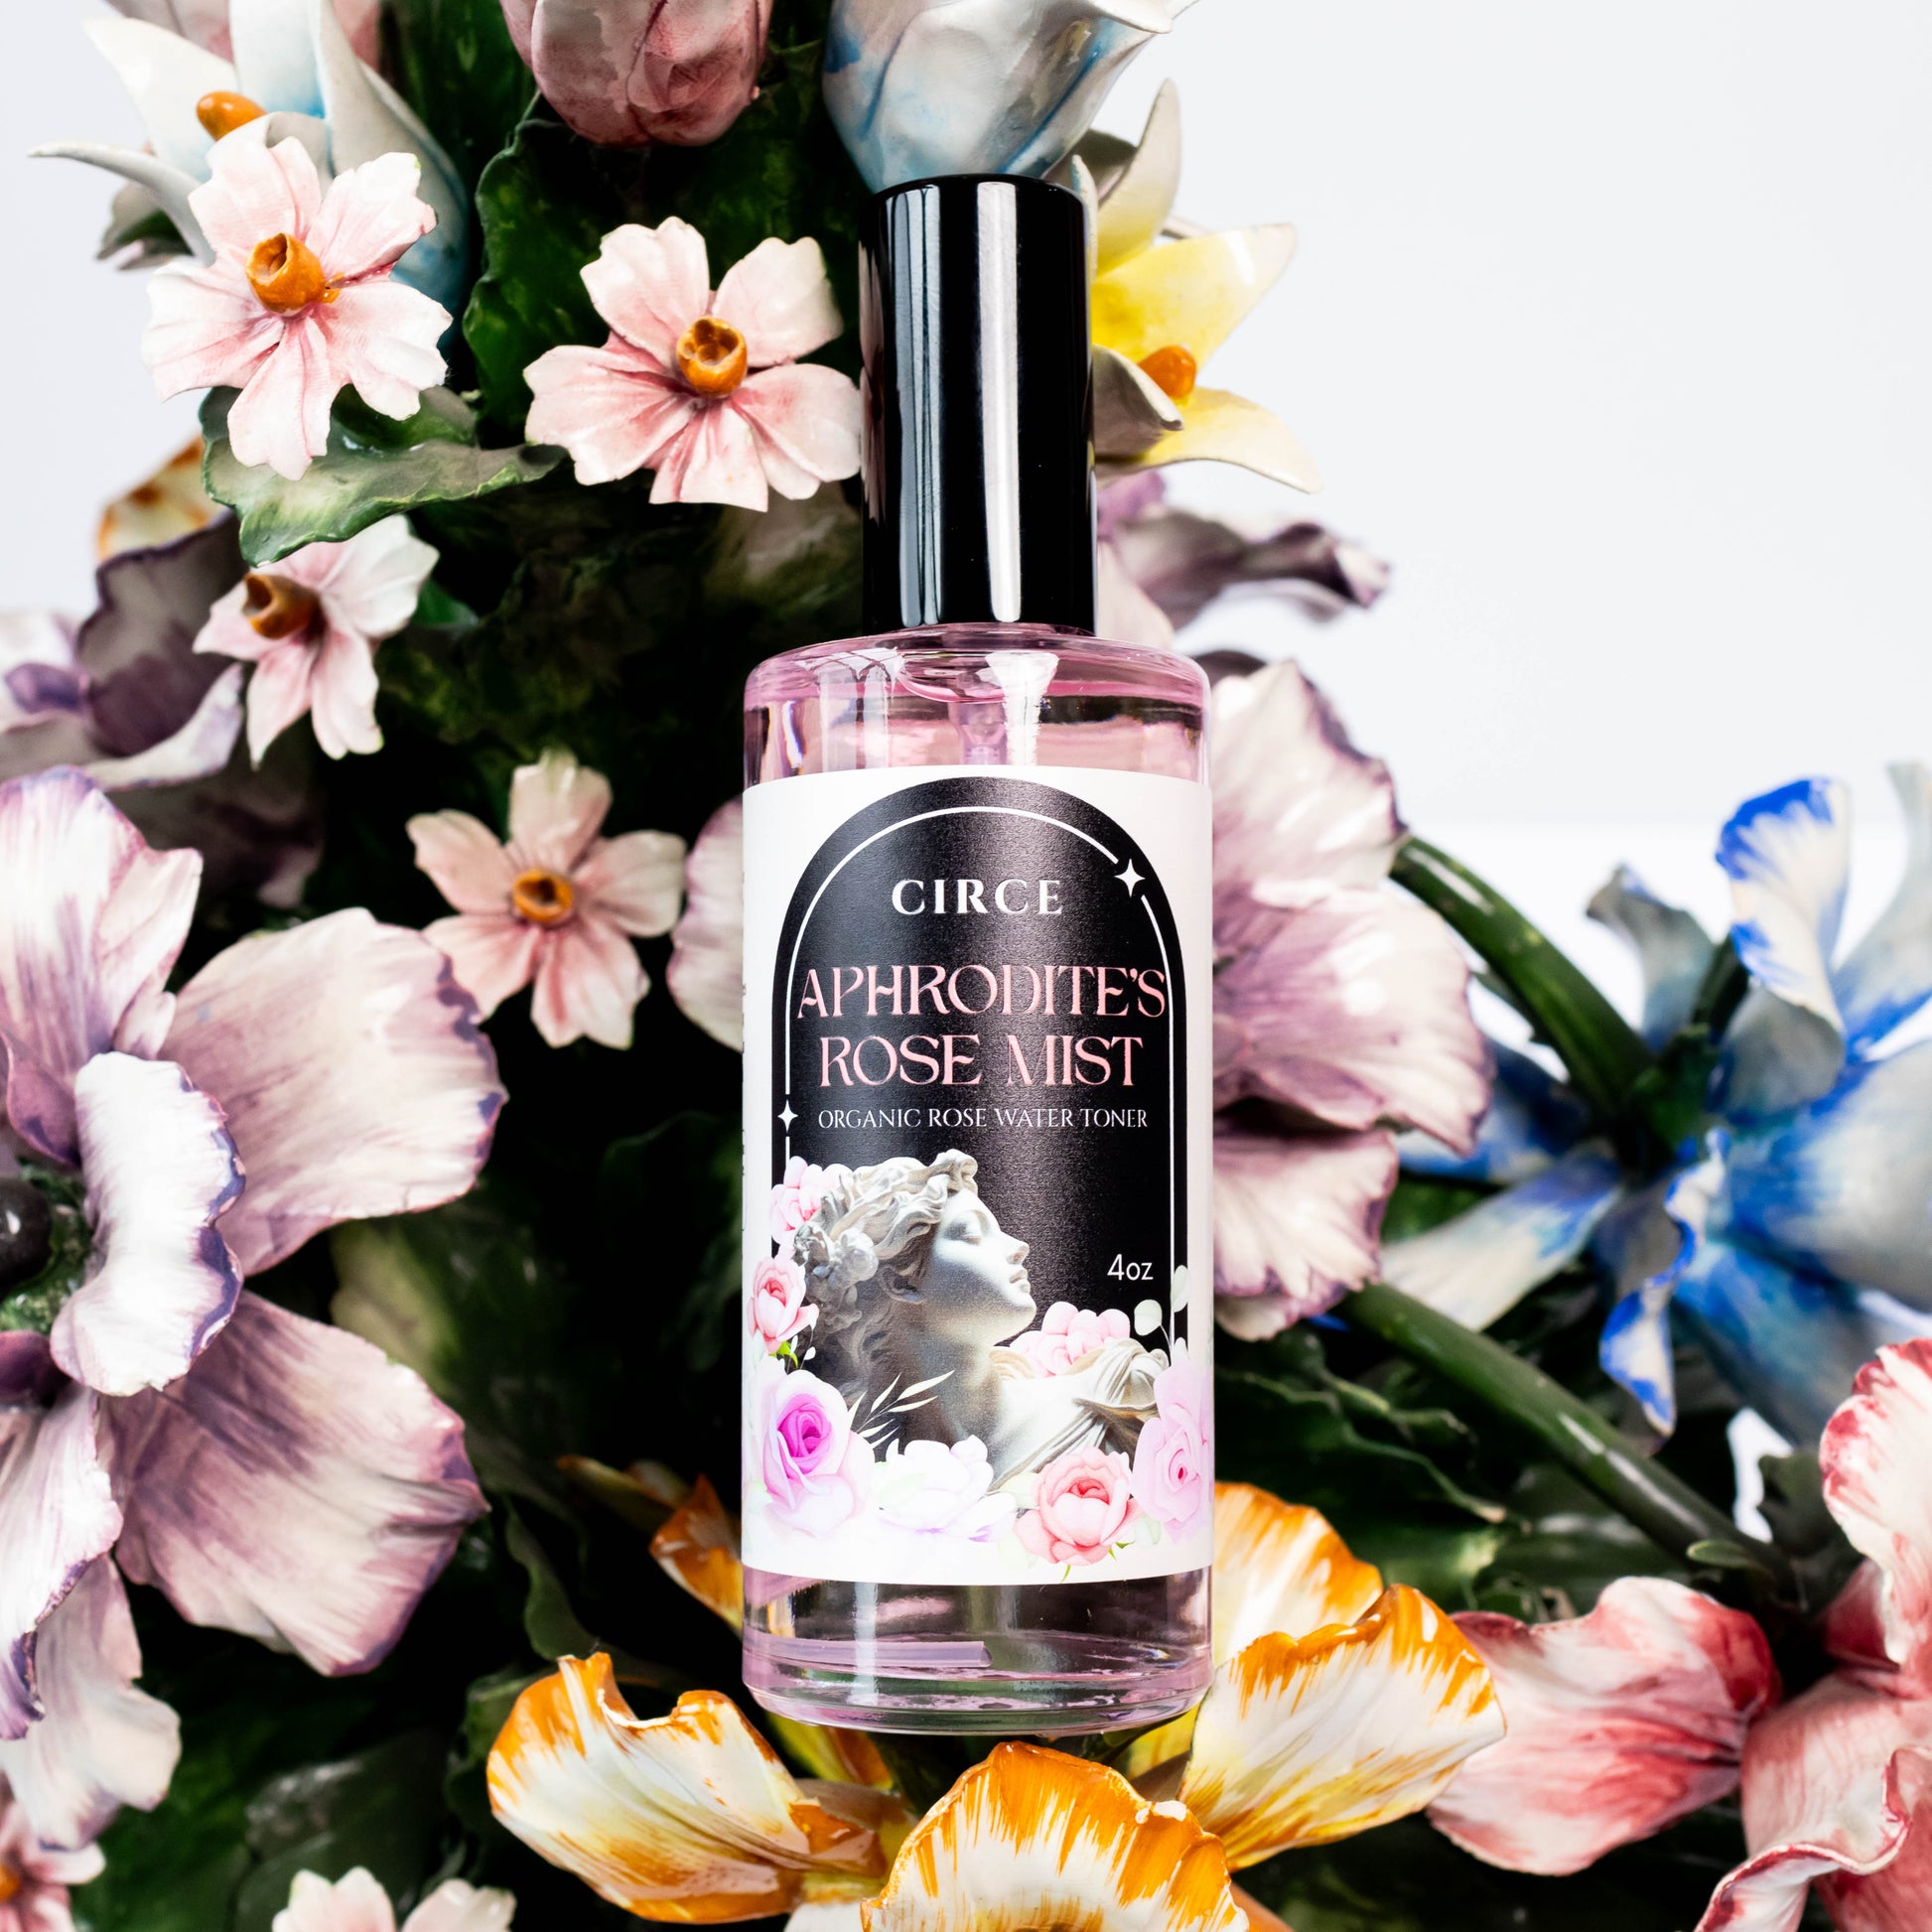 Aphrodite's Rose Mist - Organic Rose Water Toner  from Circe Boutique